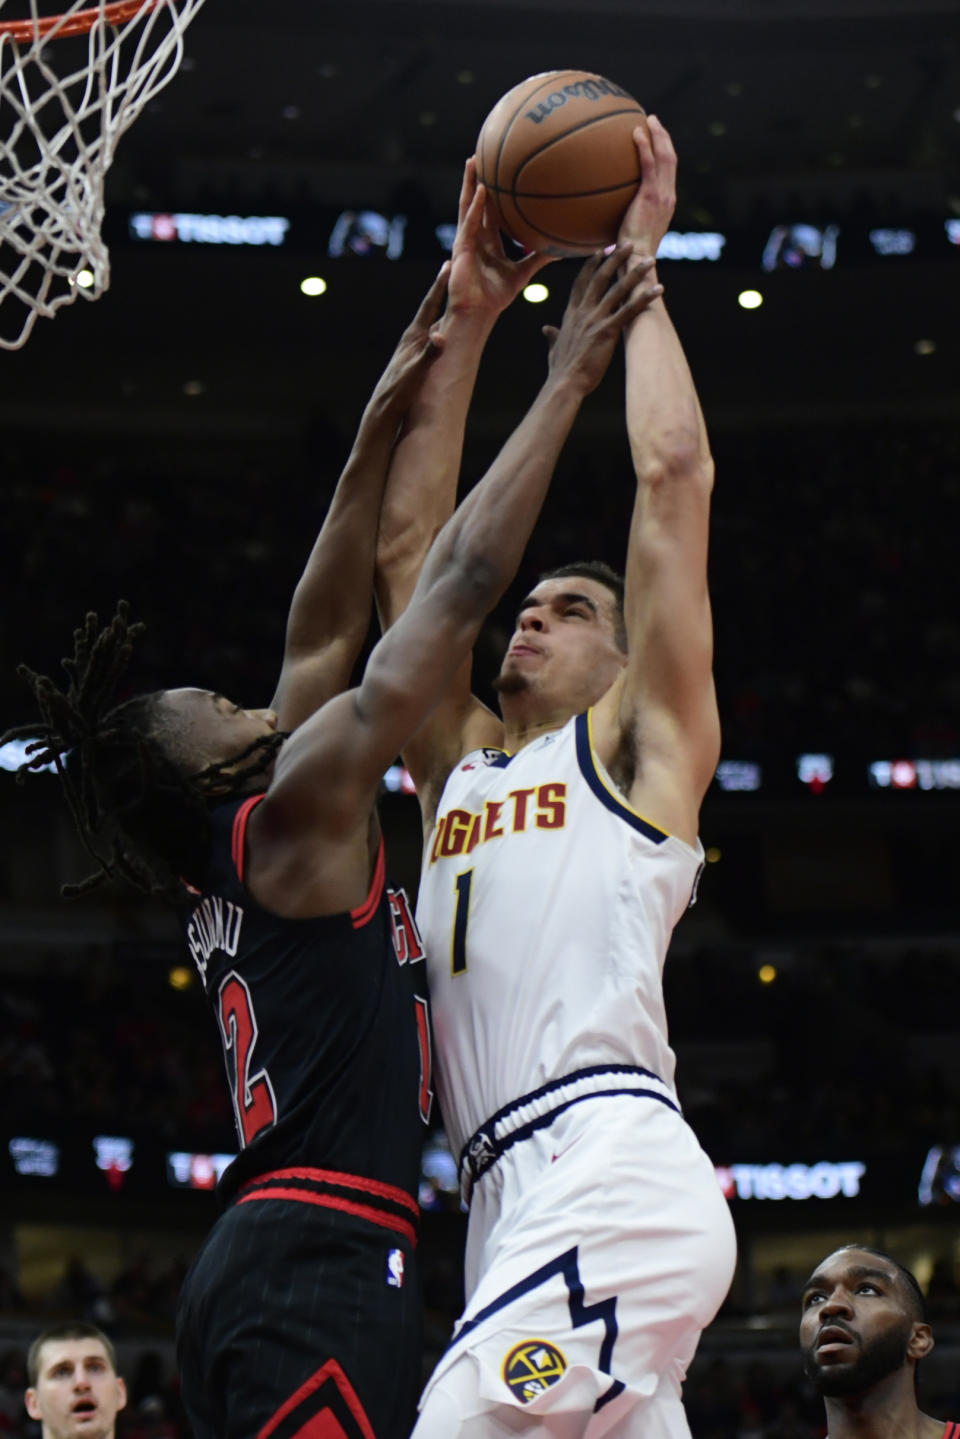 Denver Nuggets' Michael Porter Jr. (1) goes up to shoot against Chicago Bulls' Ayo Dosunmu (12) during the first half of an NBA basketball game Sunday, Nov. 13, 2022, in Chicago. (AP Photo/Paul Beaty)